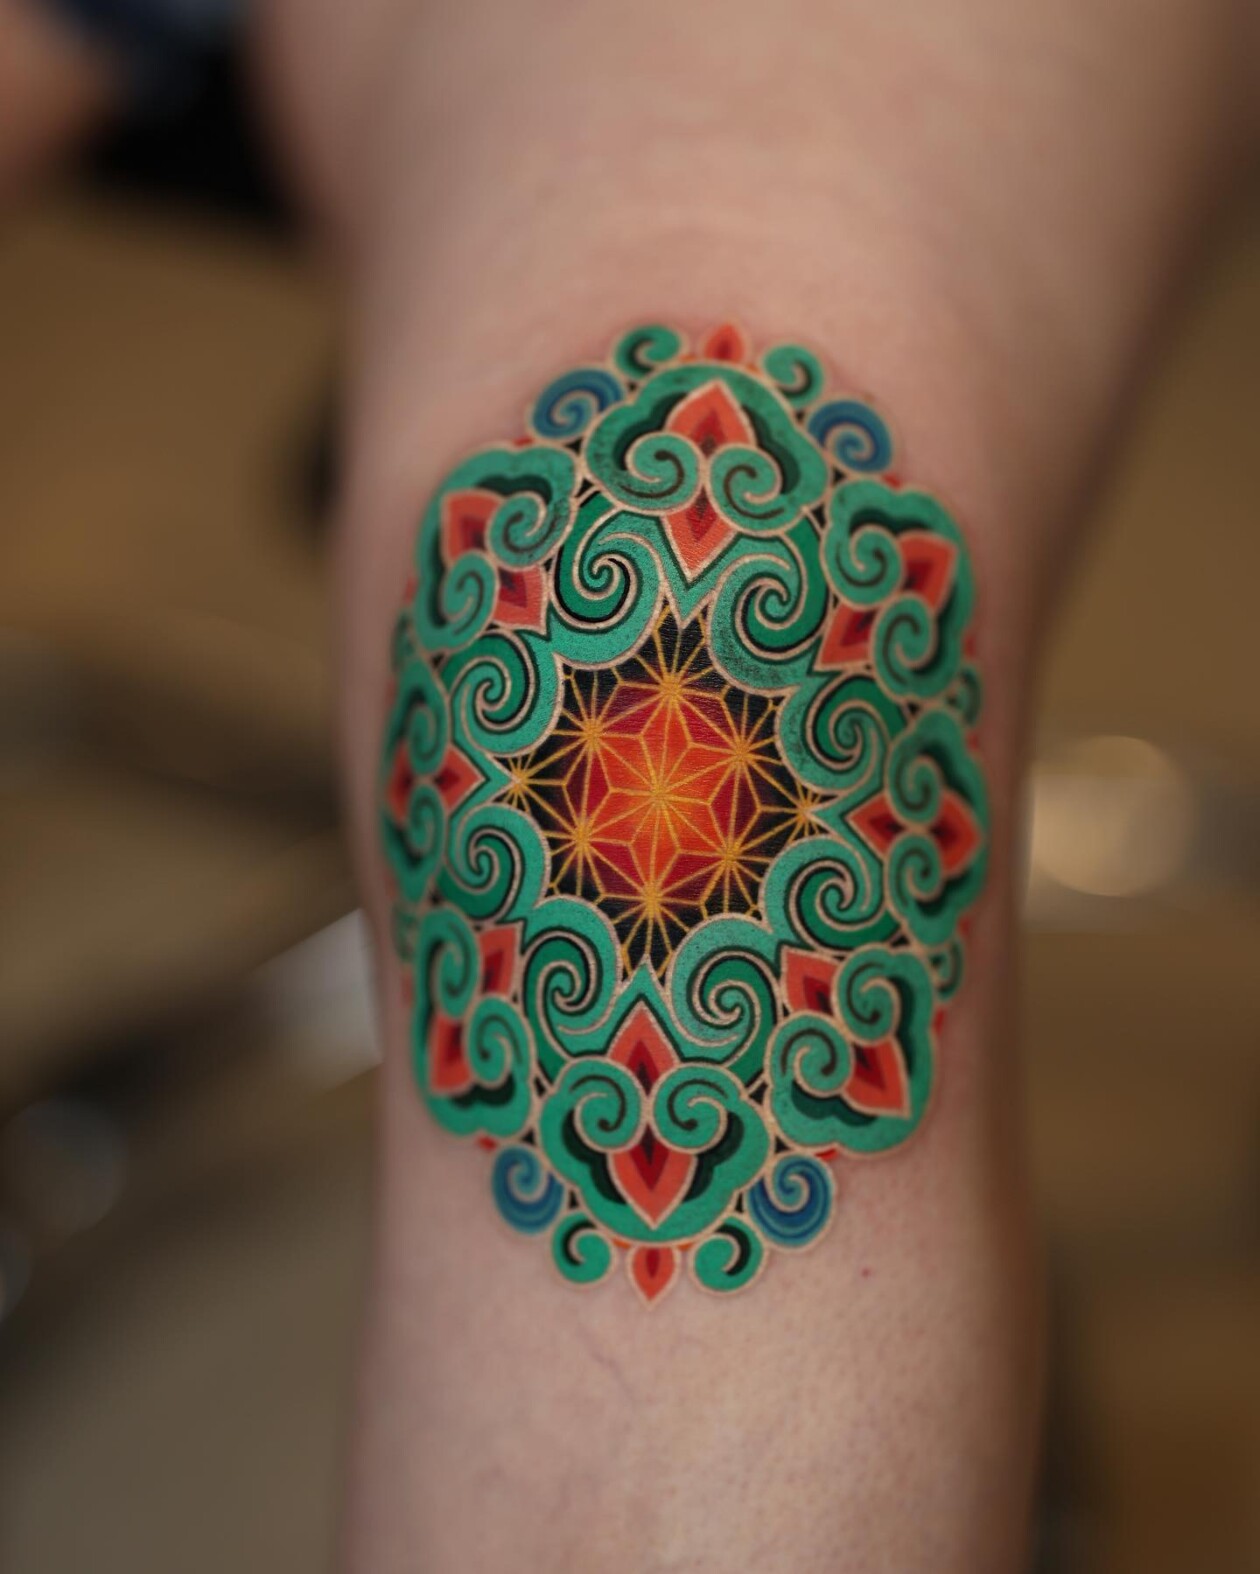 Vibrant Tattoos With Densely Layered Patterns By Korean Artist Pittakkm (1)